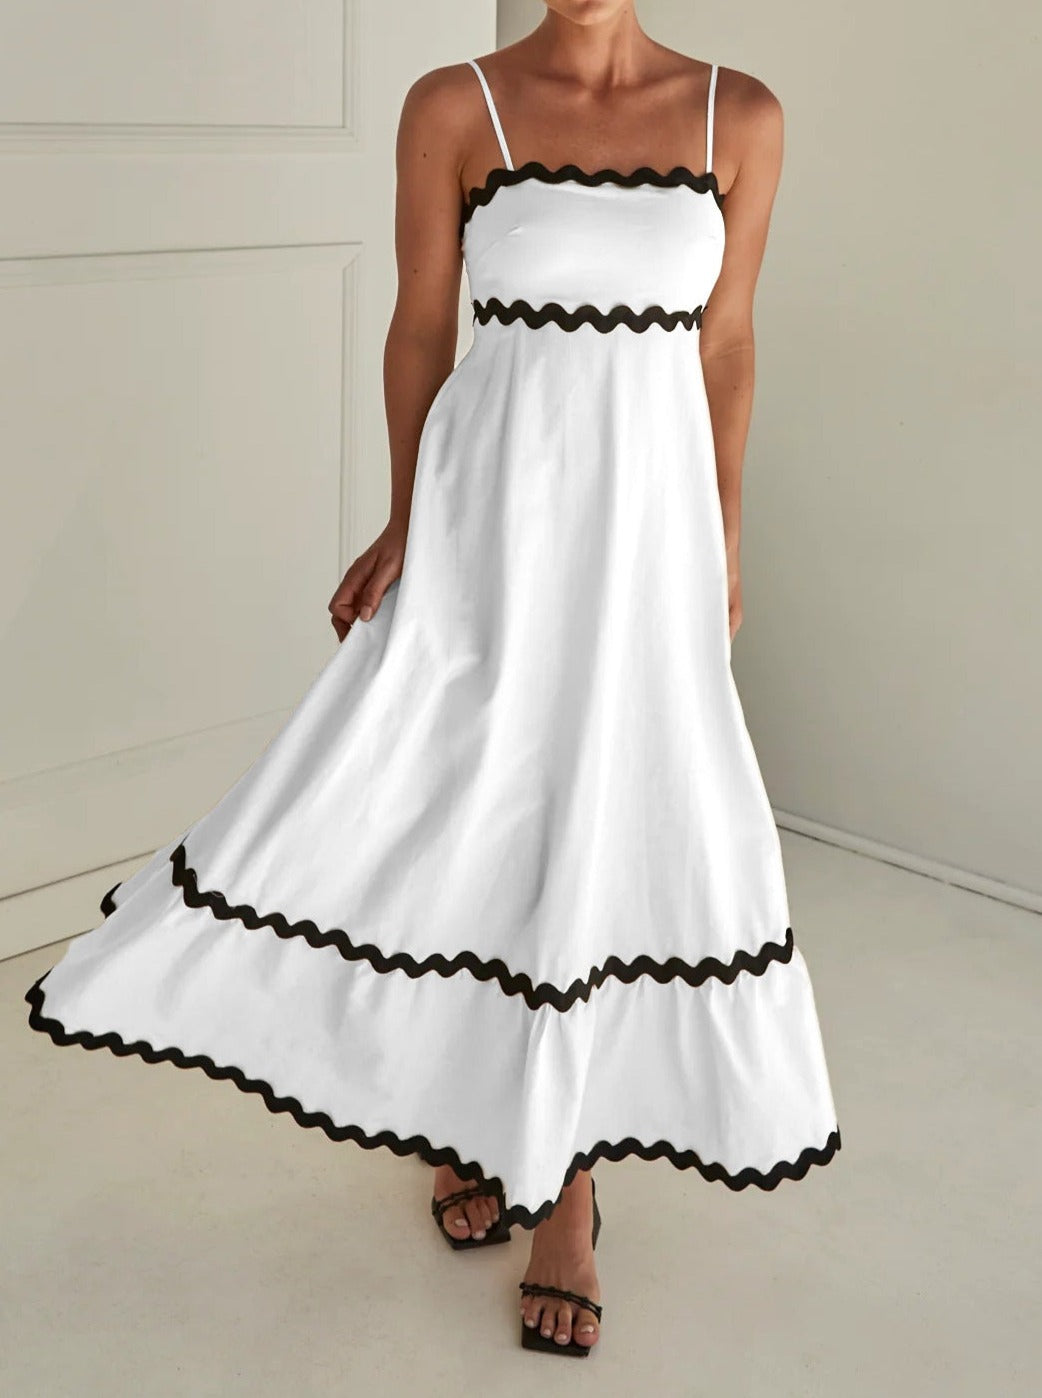 NTG Fad Black edge + Pure white / S Solid color lace splicing suspender strapless full skirt dress